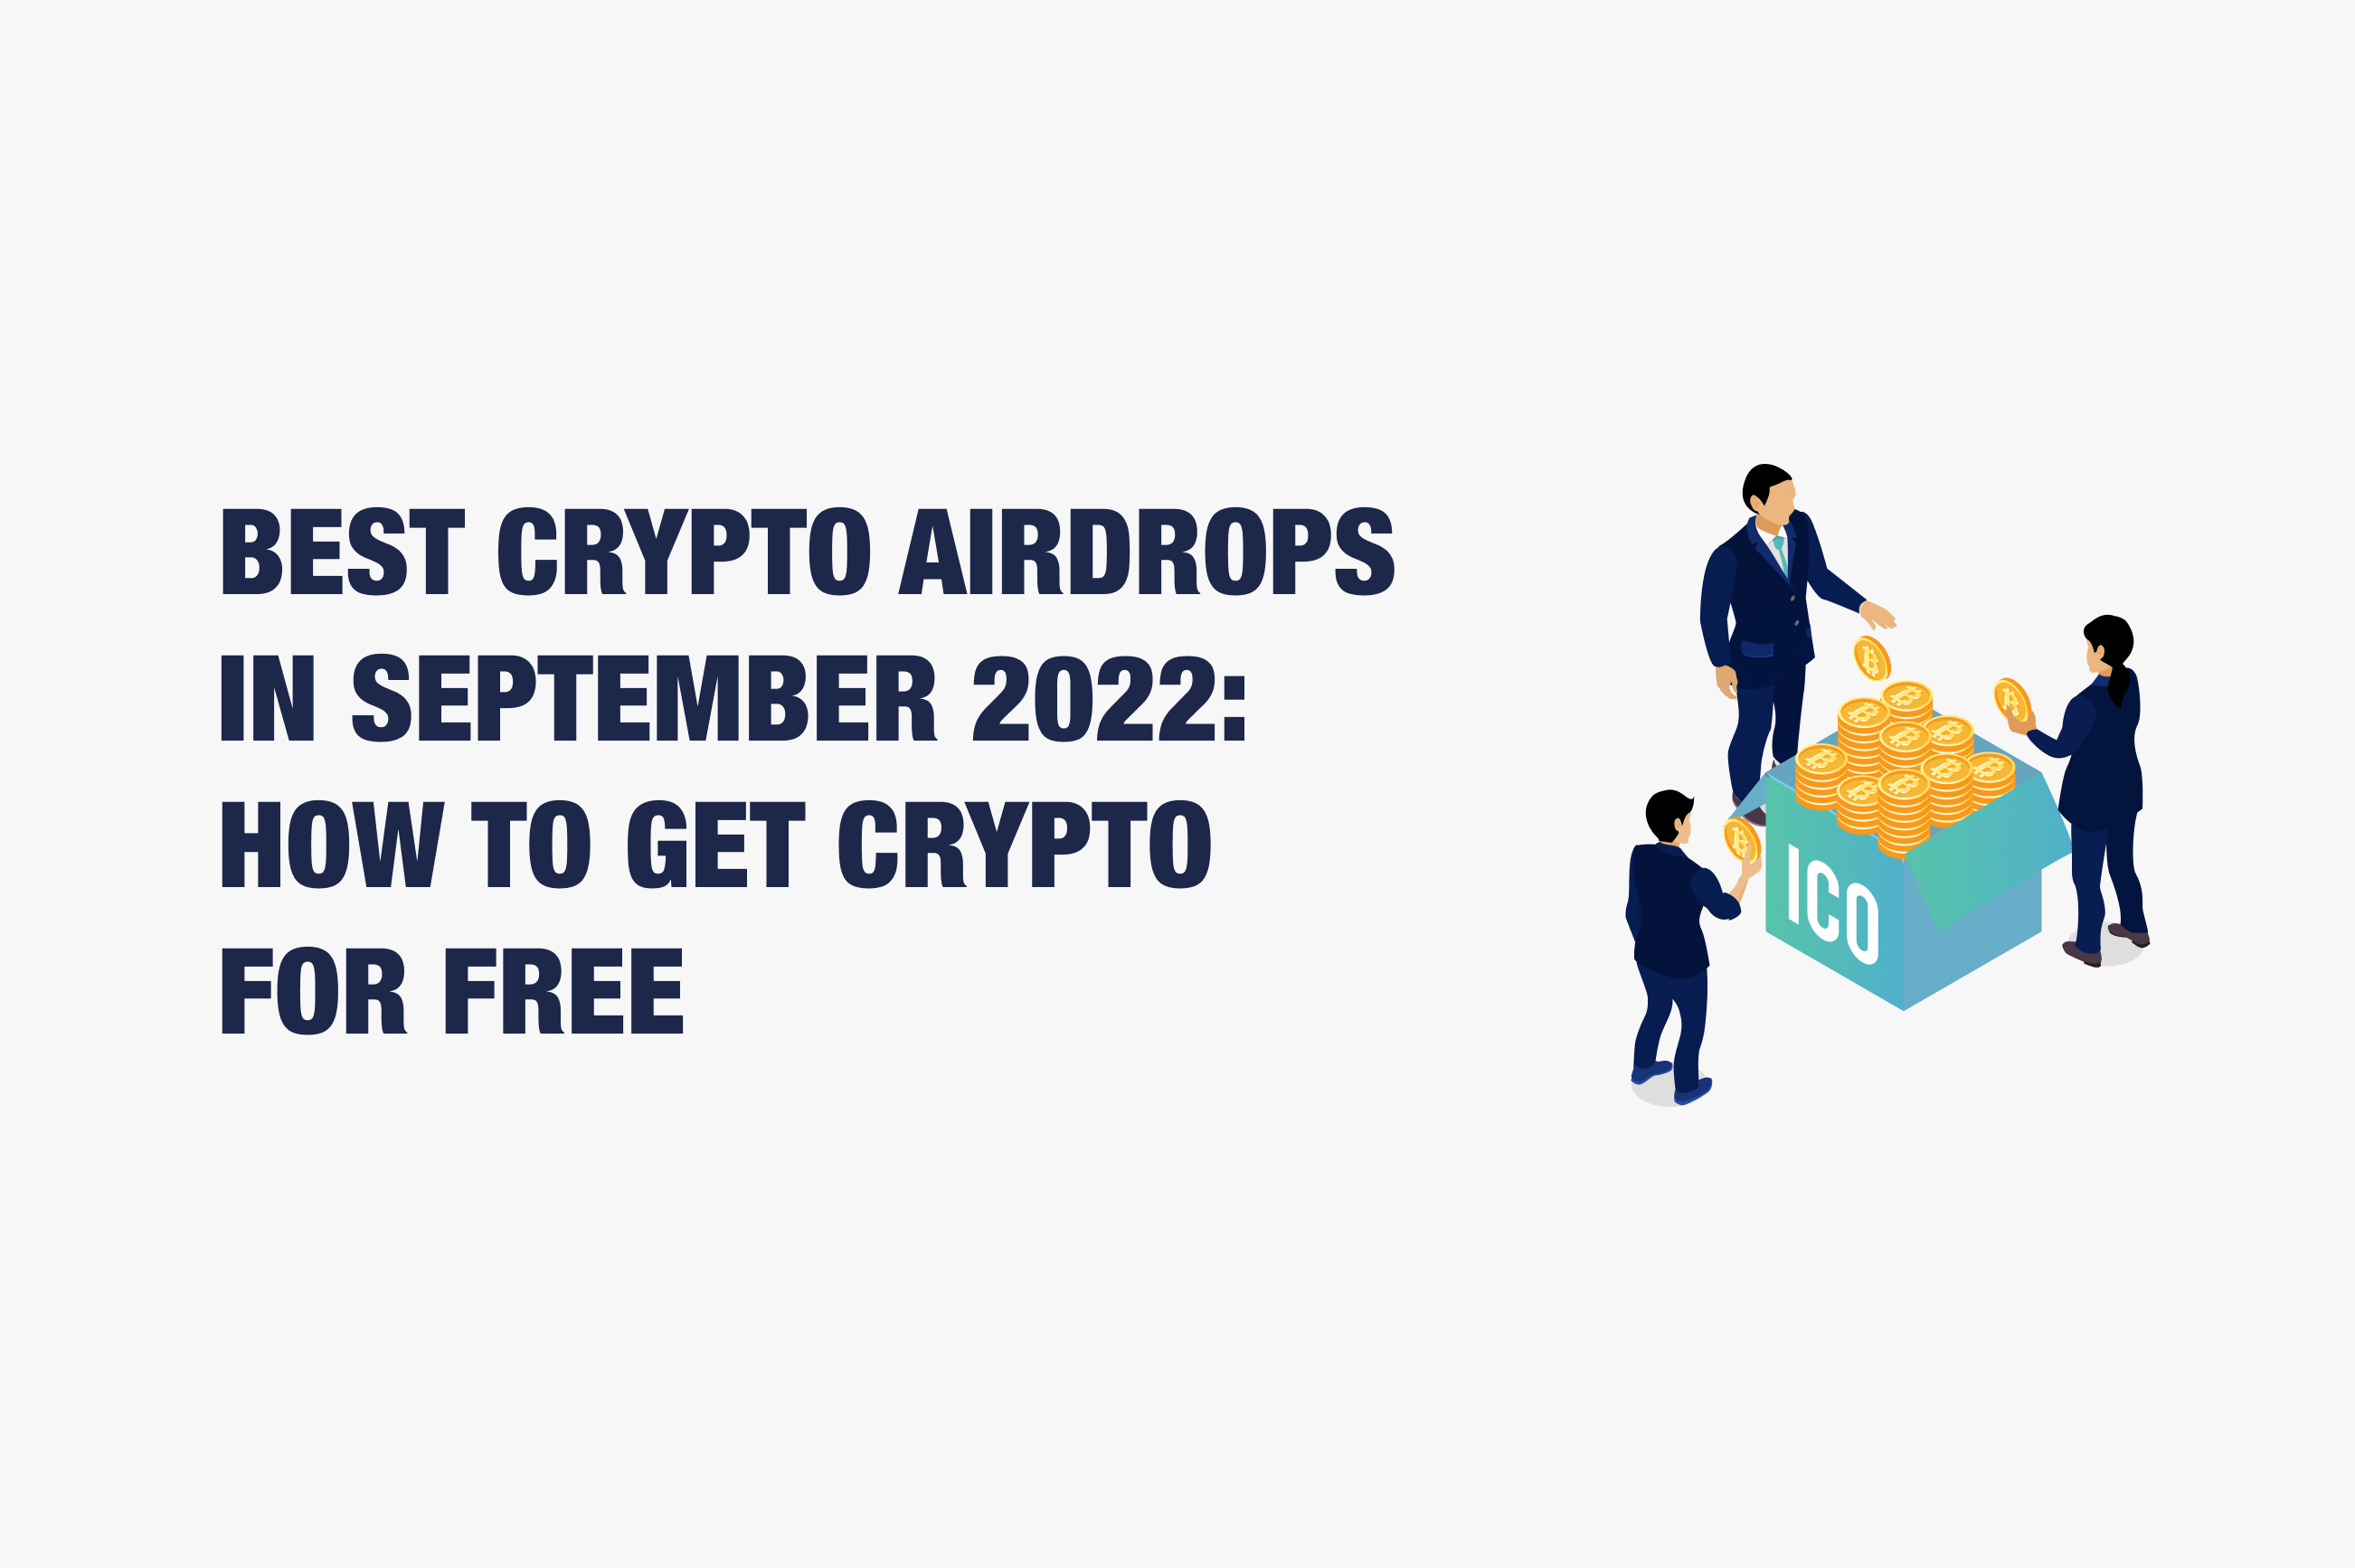 Best Crypto Airdrops in September 2022: How to Get Crypto for Free